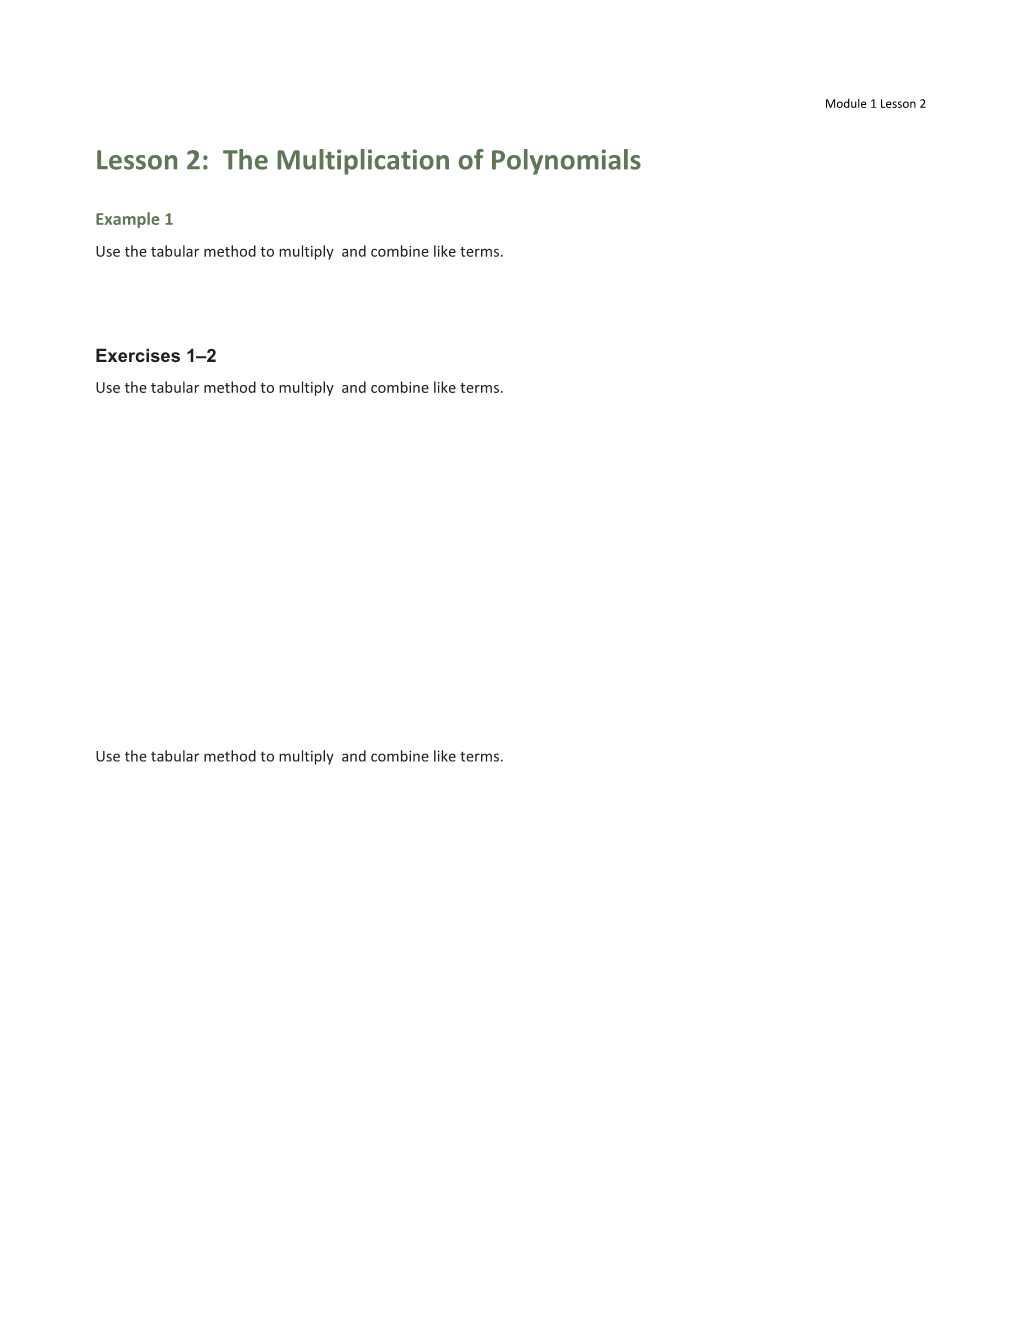 Lesson 2: the Multiplication of Polynomials